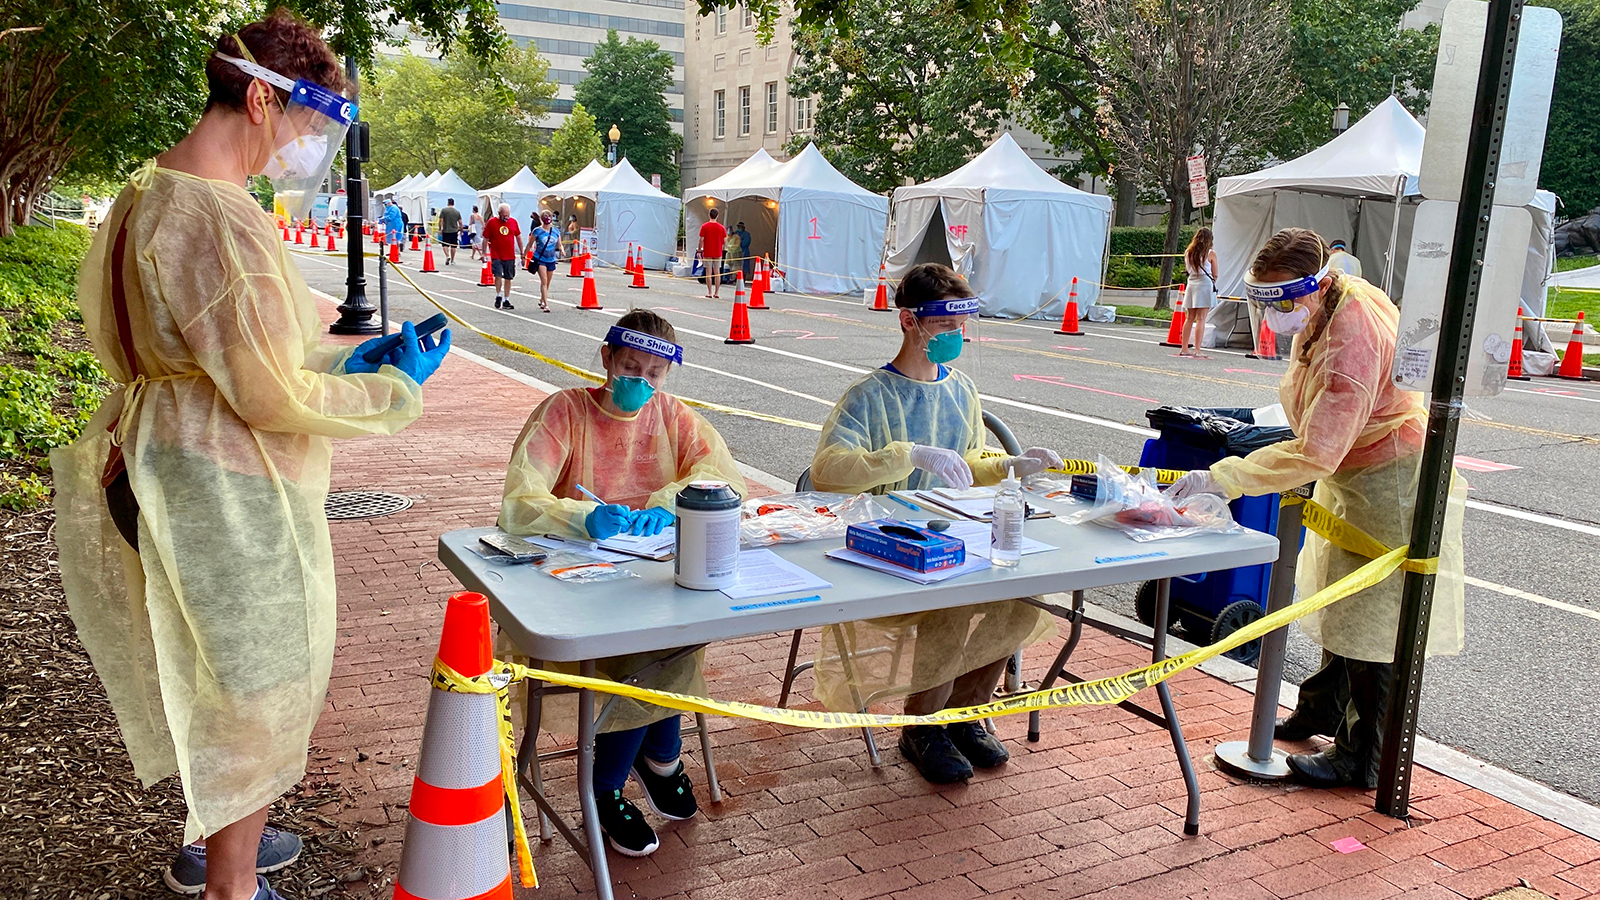 Health workers provide Covid-19 testing on a street in Washington, DC, on August 14.